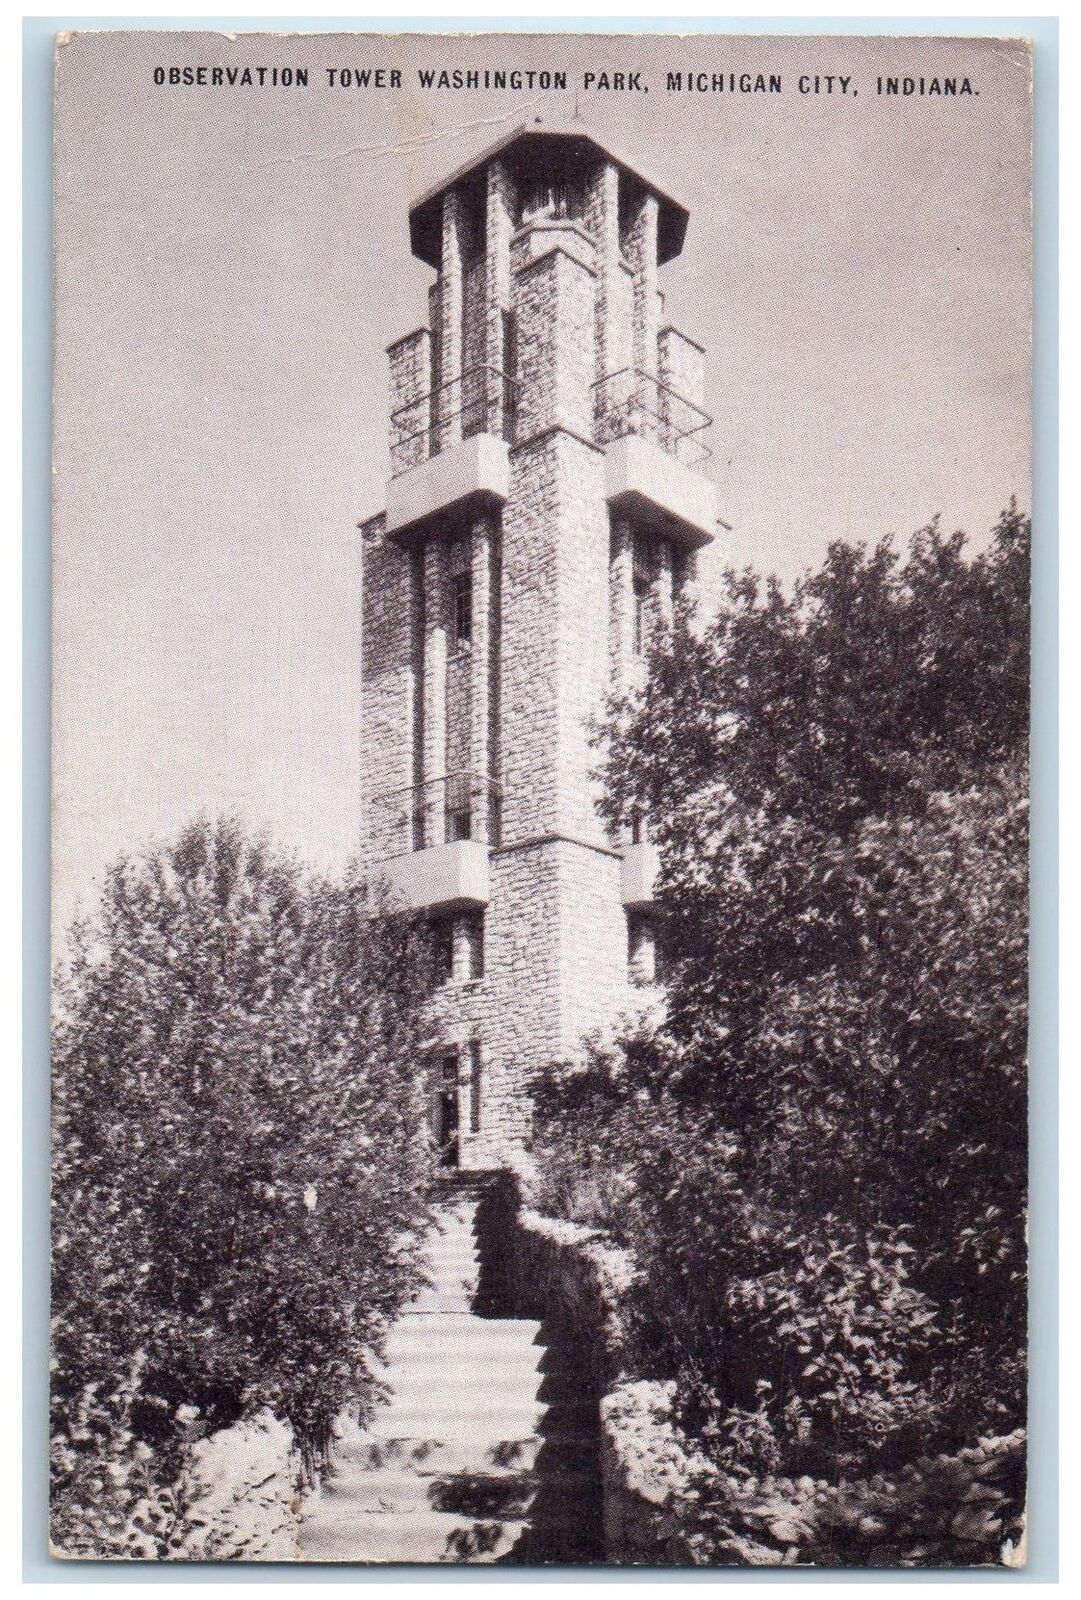 c1950 Observation Tower Washington Park Stairs Michigan City Indiana IN Postcard